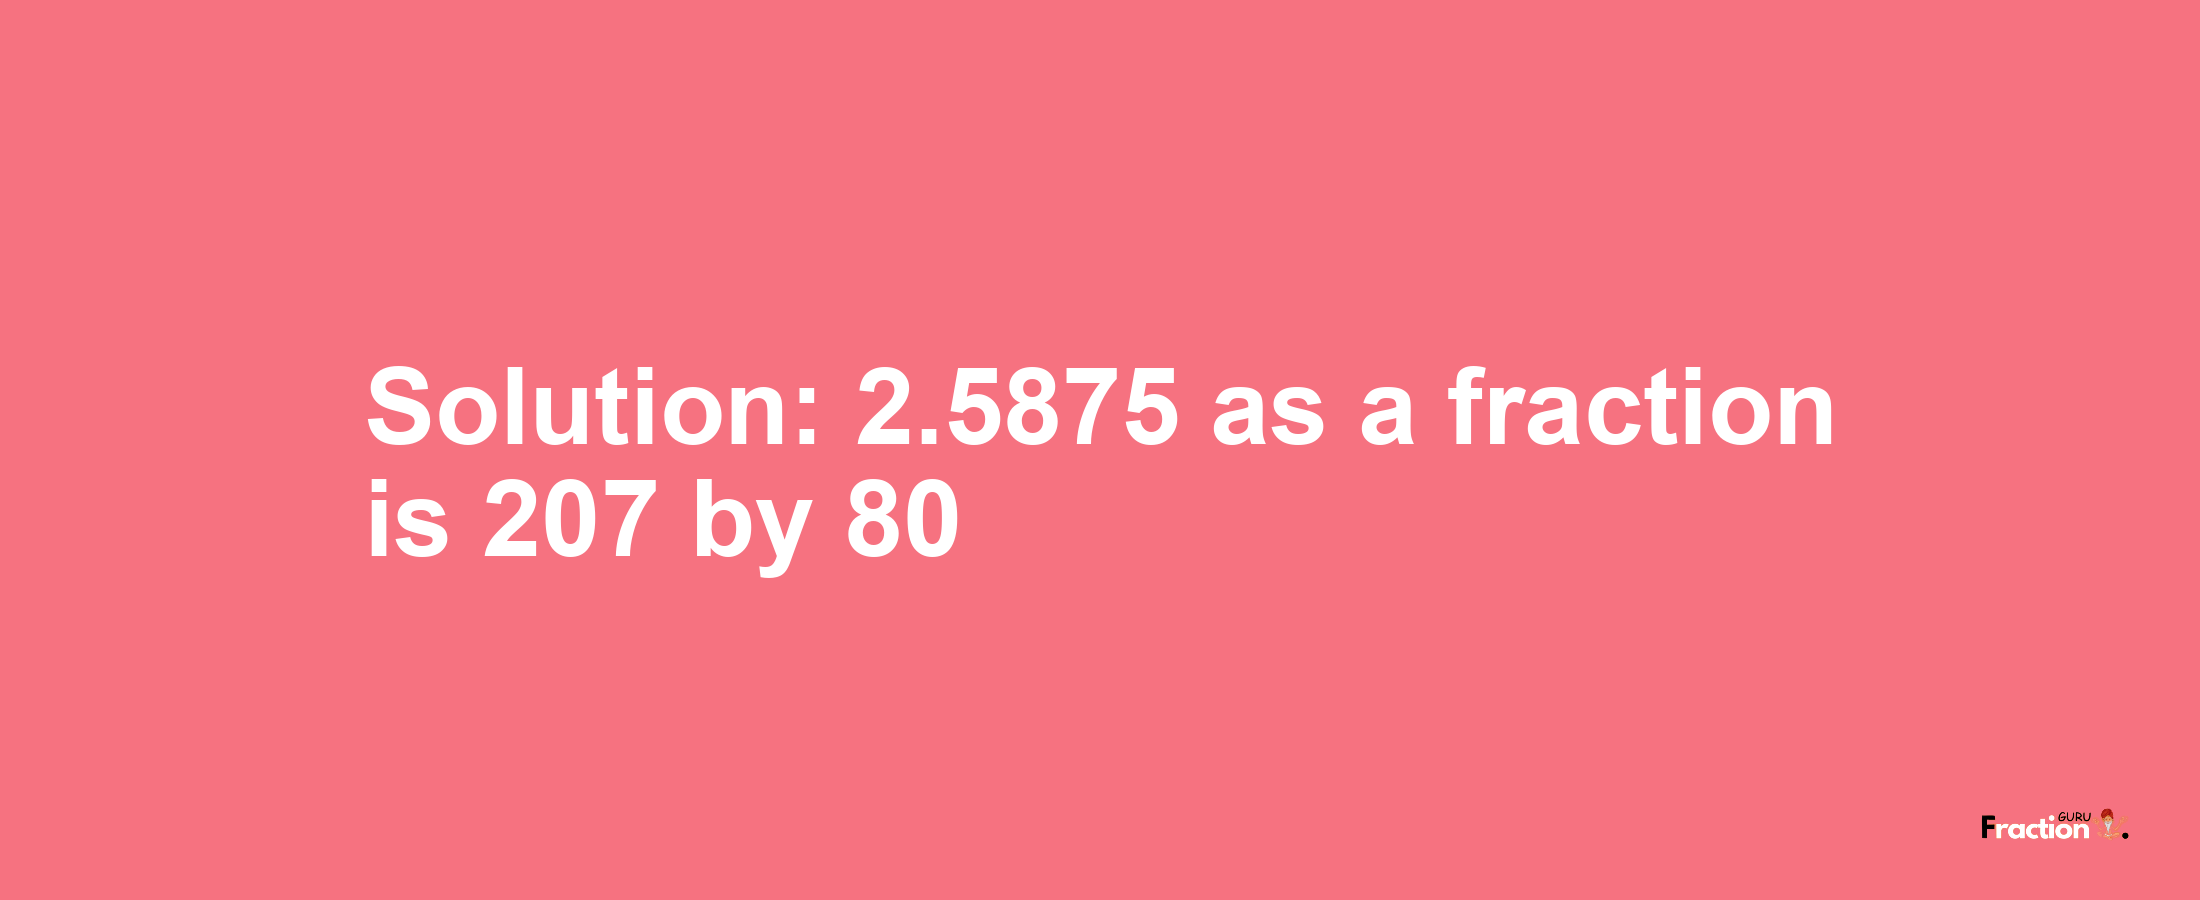 Solution:2.5875 as a fraction is 207/80